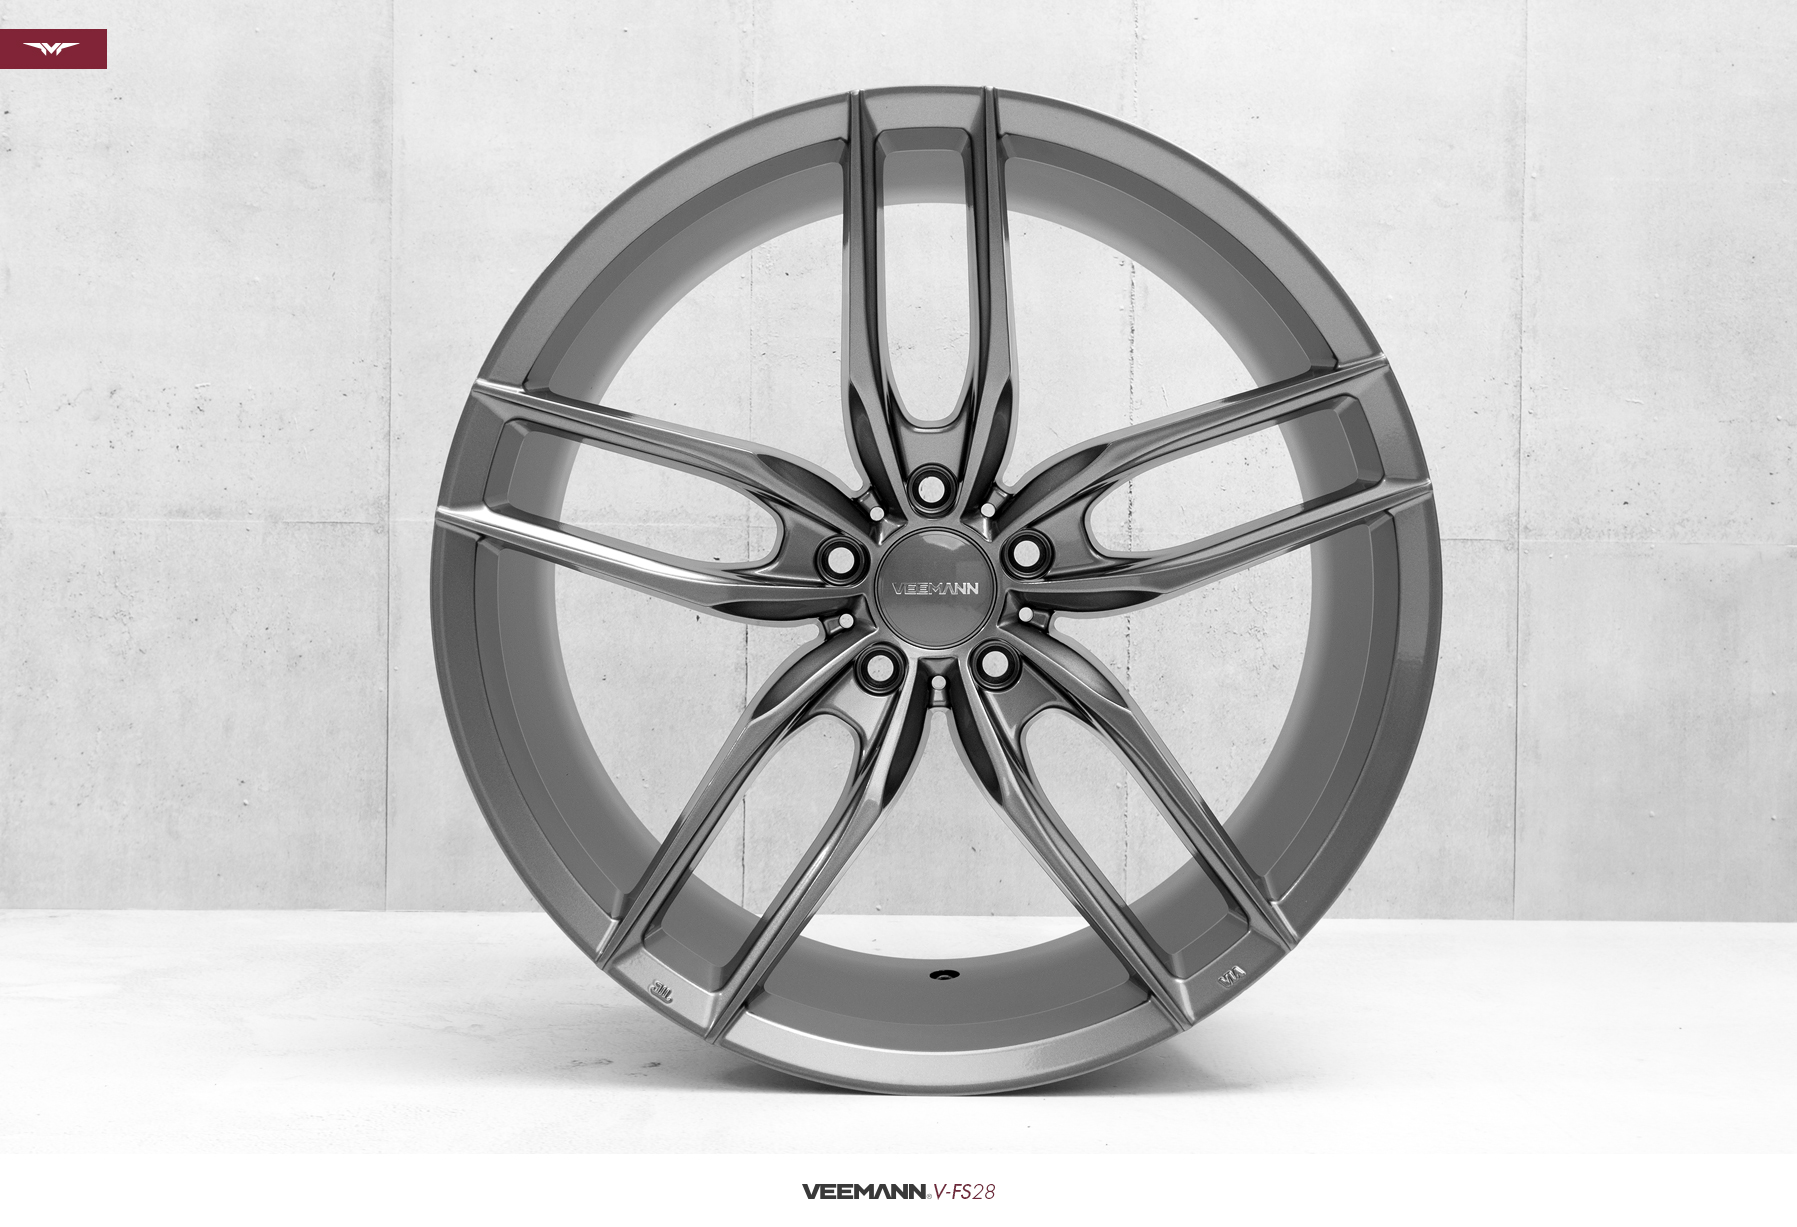 NEW 19  VEEMANN V FS28 ALLOY WHEELS IN GLOSS GRAPHITE WITH DEEPER CONCAVE 9 5  REARS et42 40